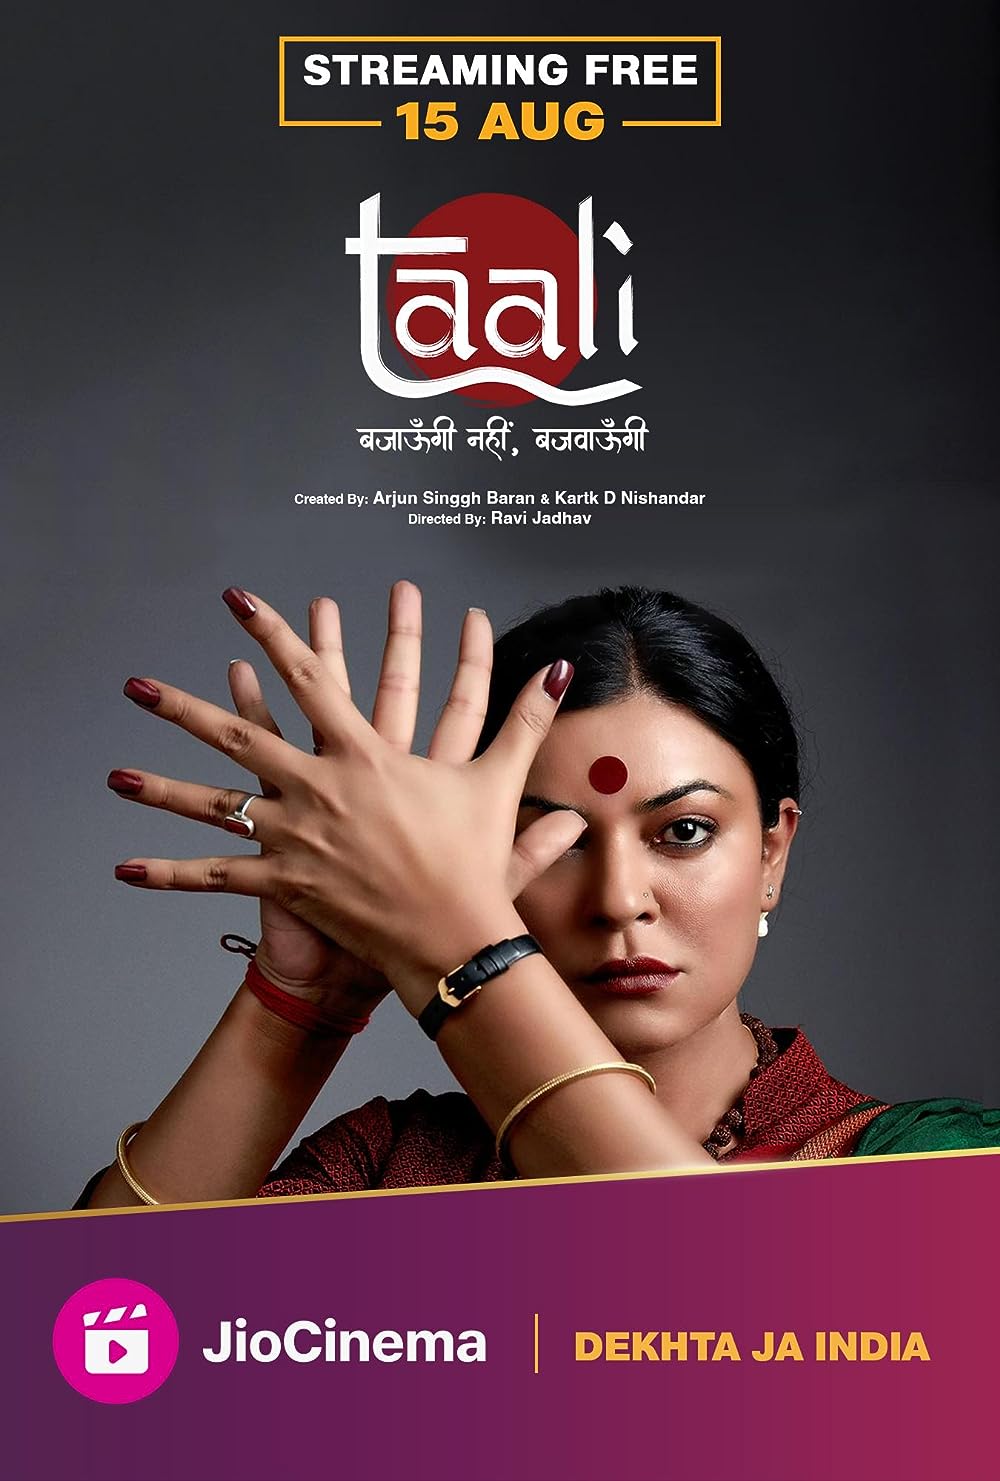 The captivating web series centered around the life of transgender activist, Gauri Sawant, illuminates her courageous evolution, the path to motherhood, and the hard-fought crusade that paved the way for the recognition of the third gender on all official documents in India.